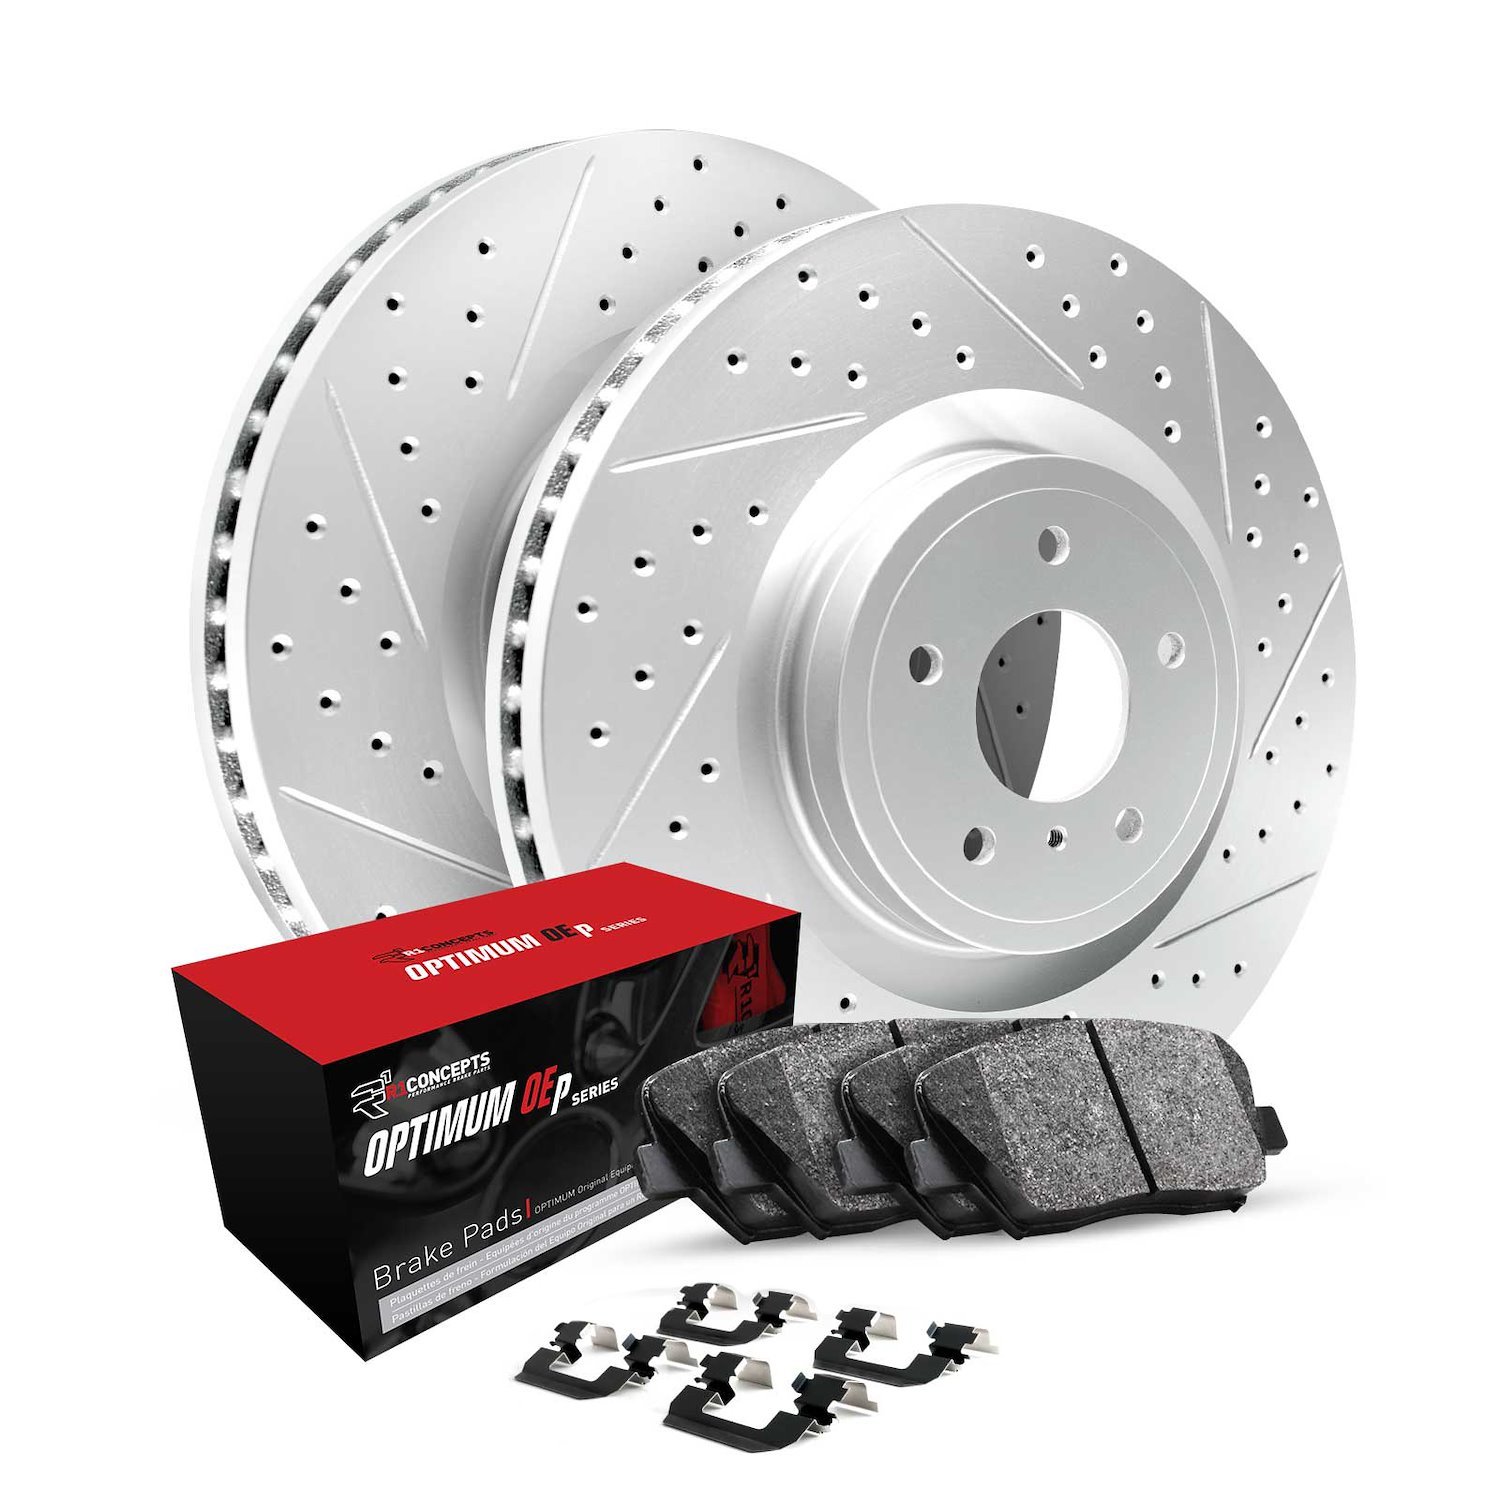 GEO-Carbon Drilled/Slotted Rotors w/Optimum OE Pads/Hardware, 2003-2008 Fits Multiple Makes/Models, Position: Rear